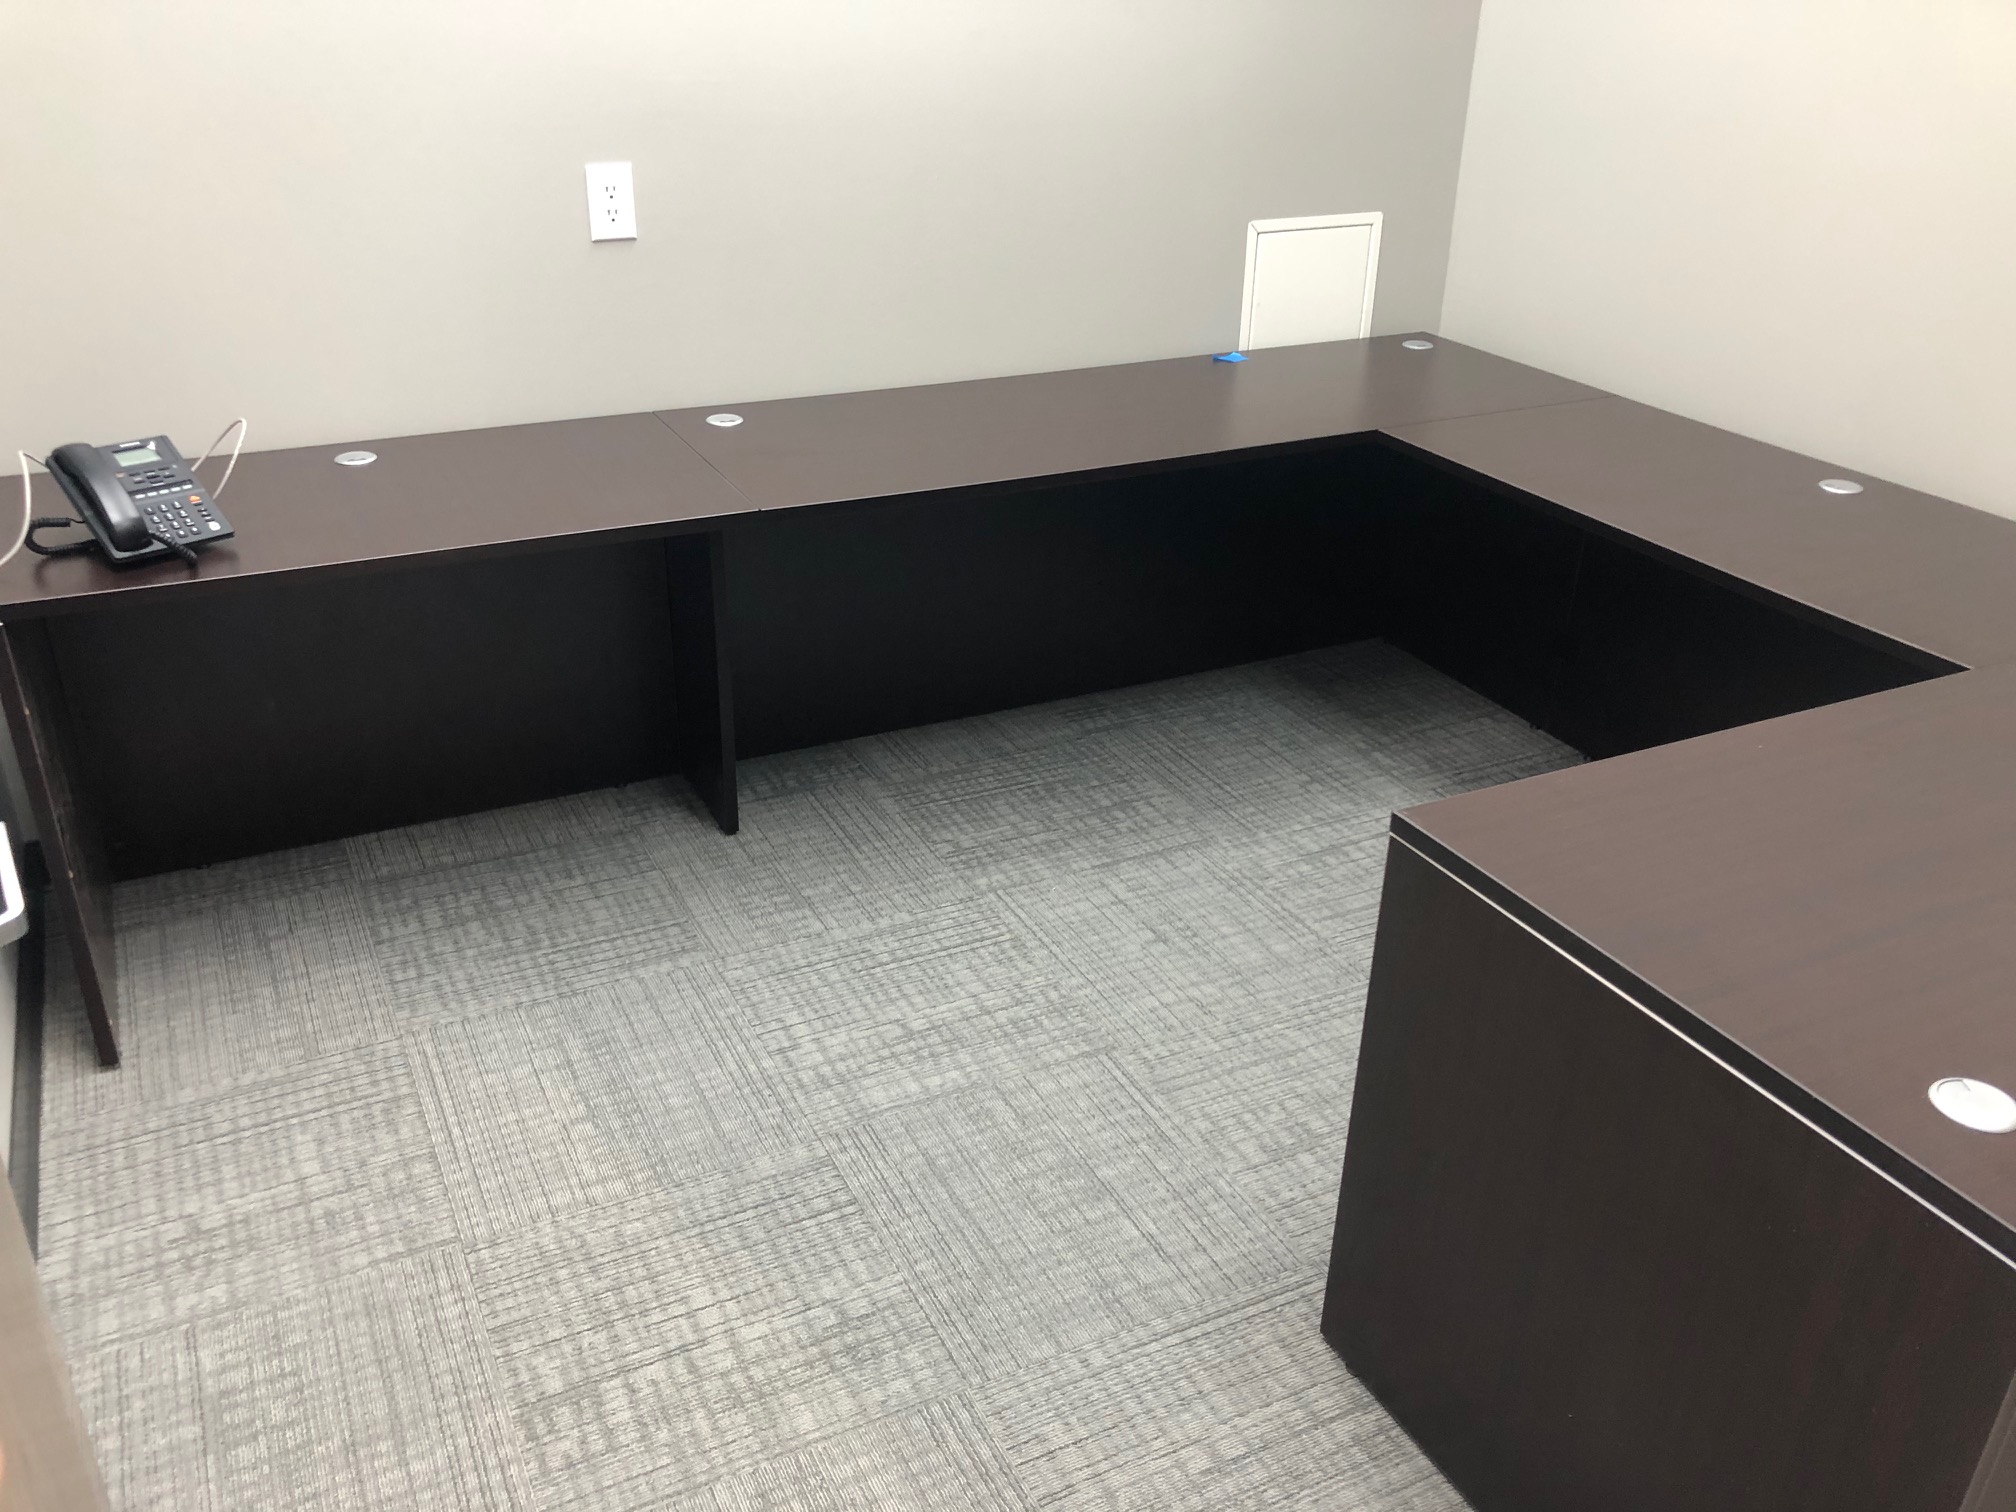 U-Shaped Desk in room with large windows